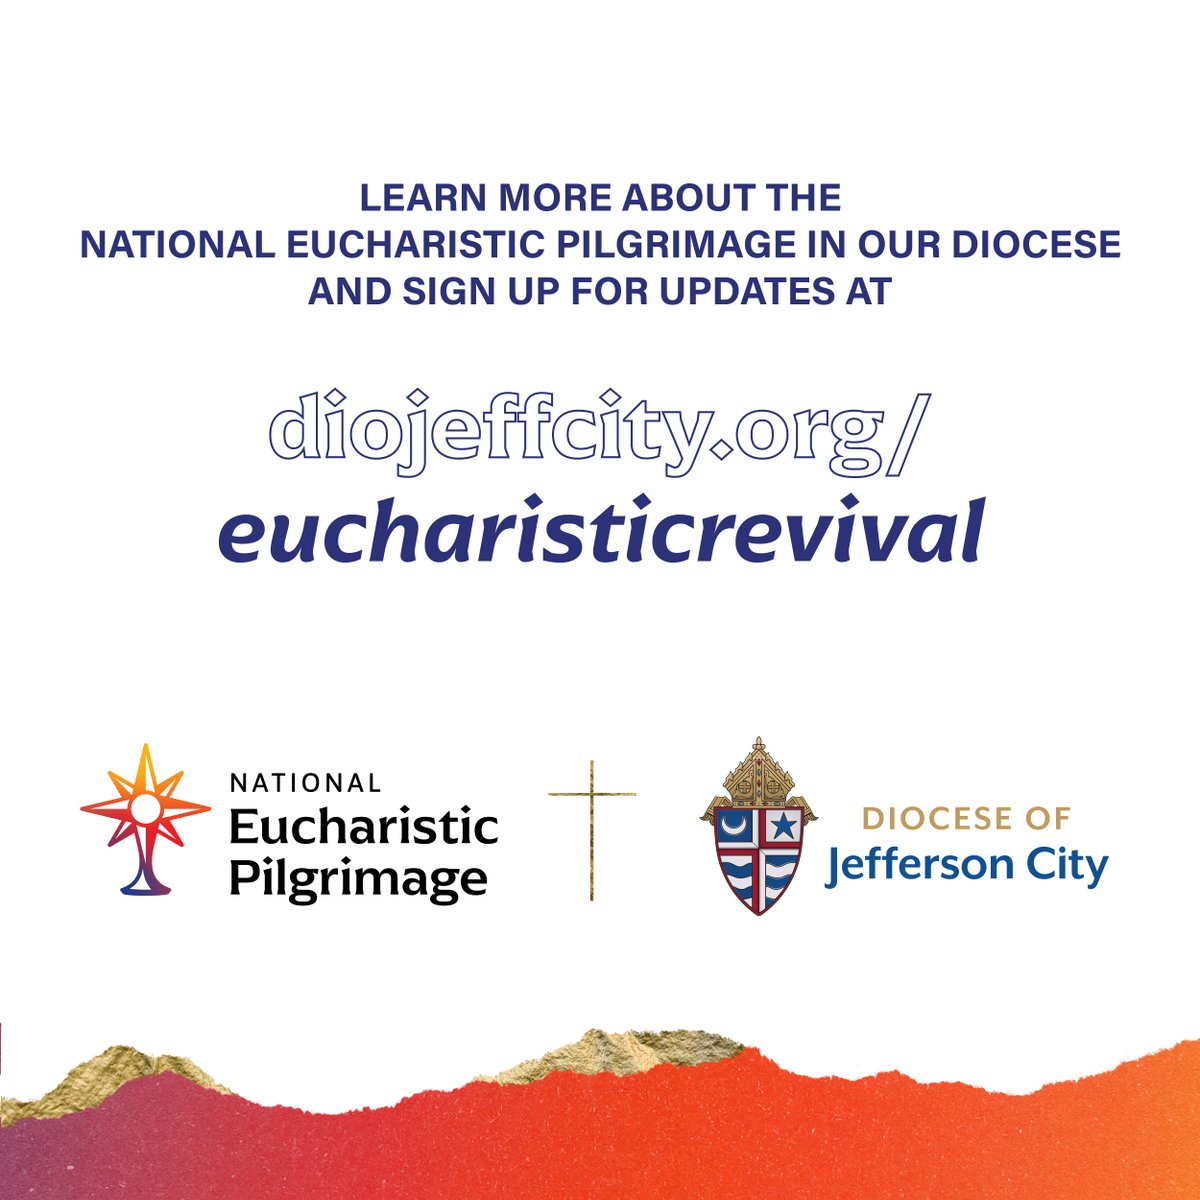 Encounter the abundant love of God in the Eucharist at one of our community events as part of the National Eucharistic Pilgrimage from July 1-5! Find opportunities for Adoration, testimonies, Reconciliation and more at diojeffcity.org/eucharisticrev…